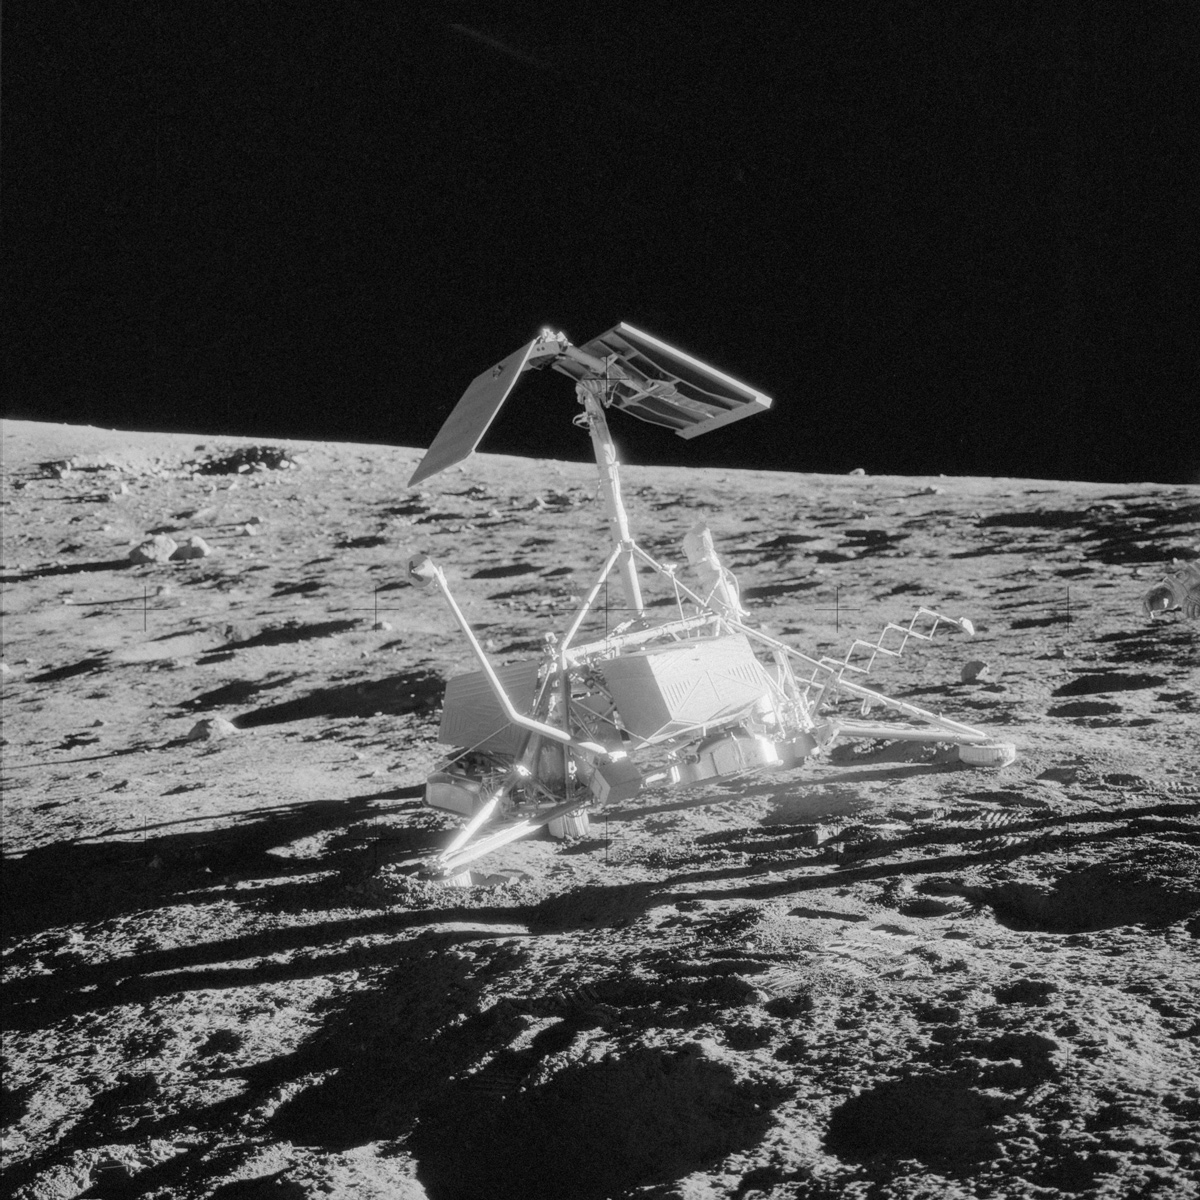 Surveyor 3, a small, white spacecraft, on the Moon's powdery surface